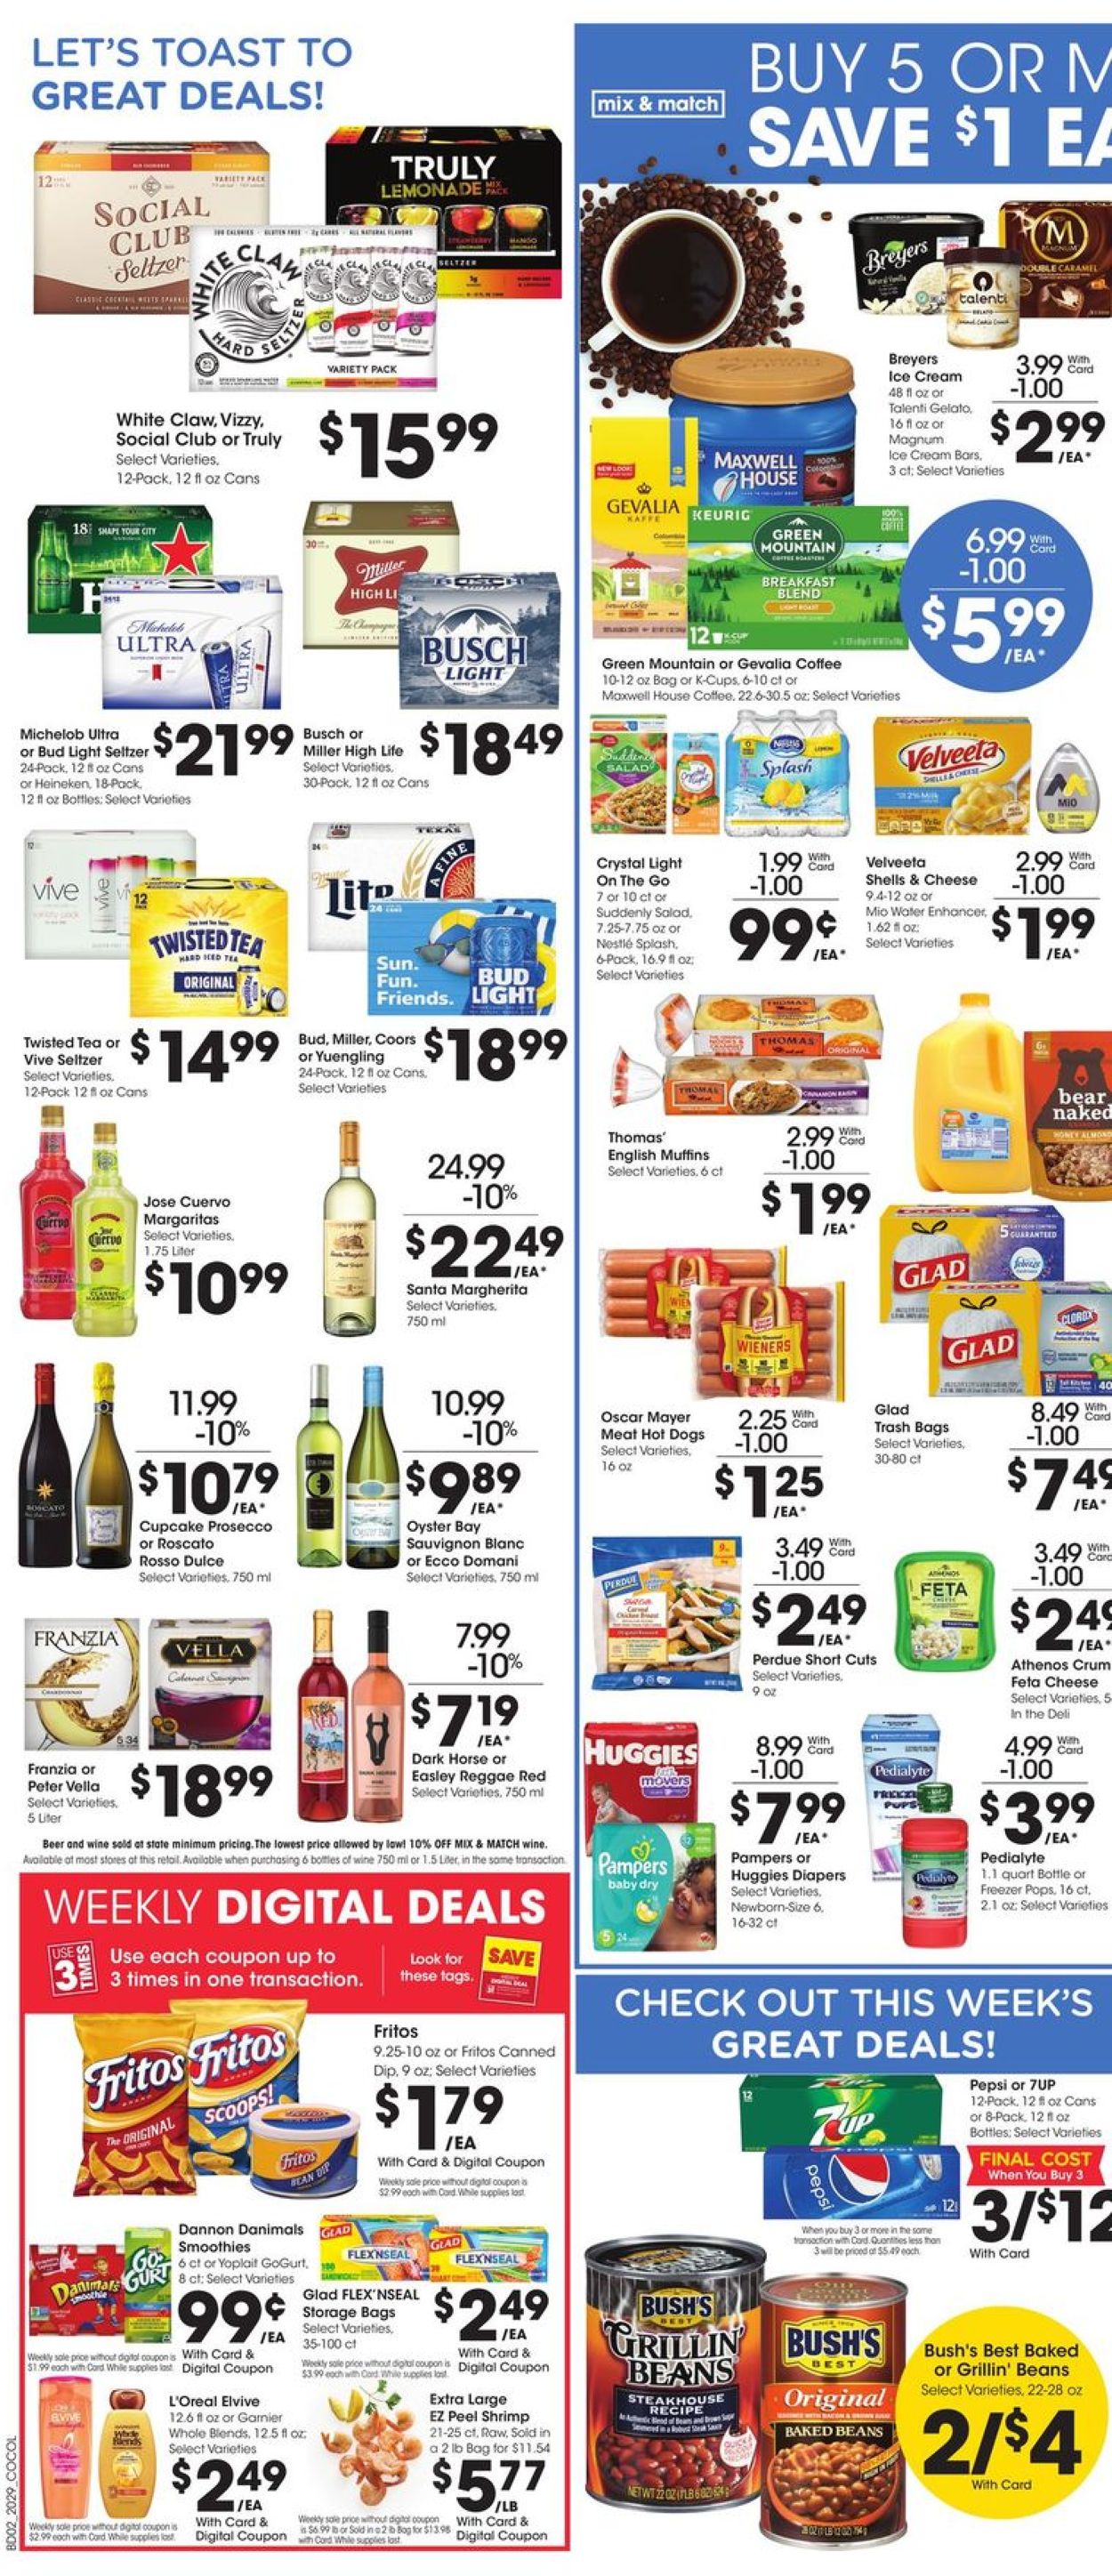 Kroger Current weekly ad 08/19 - 08/25/2020 [4] - frequent-ads.com